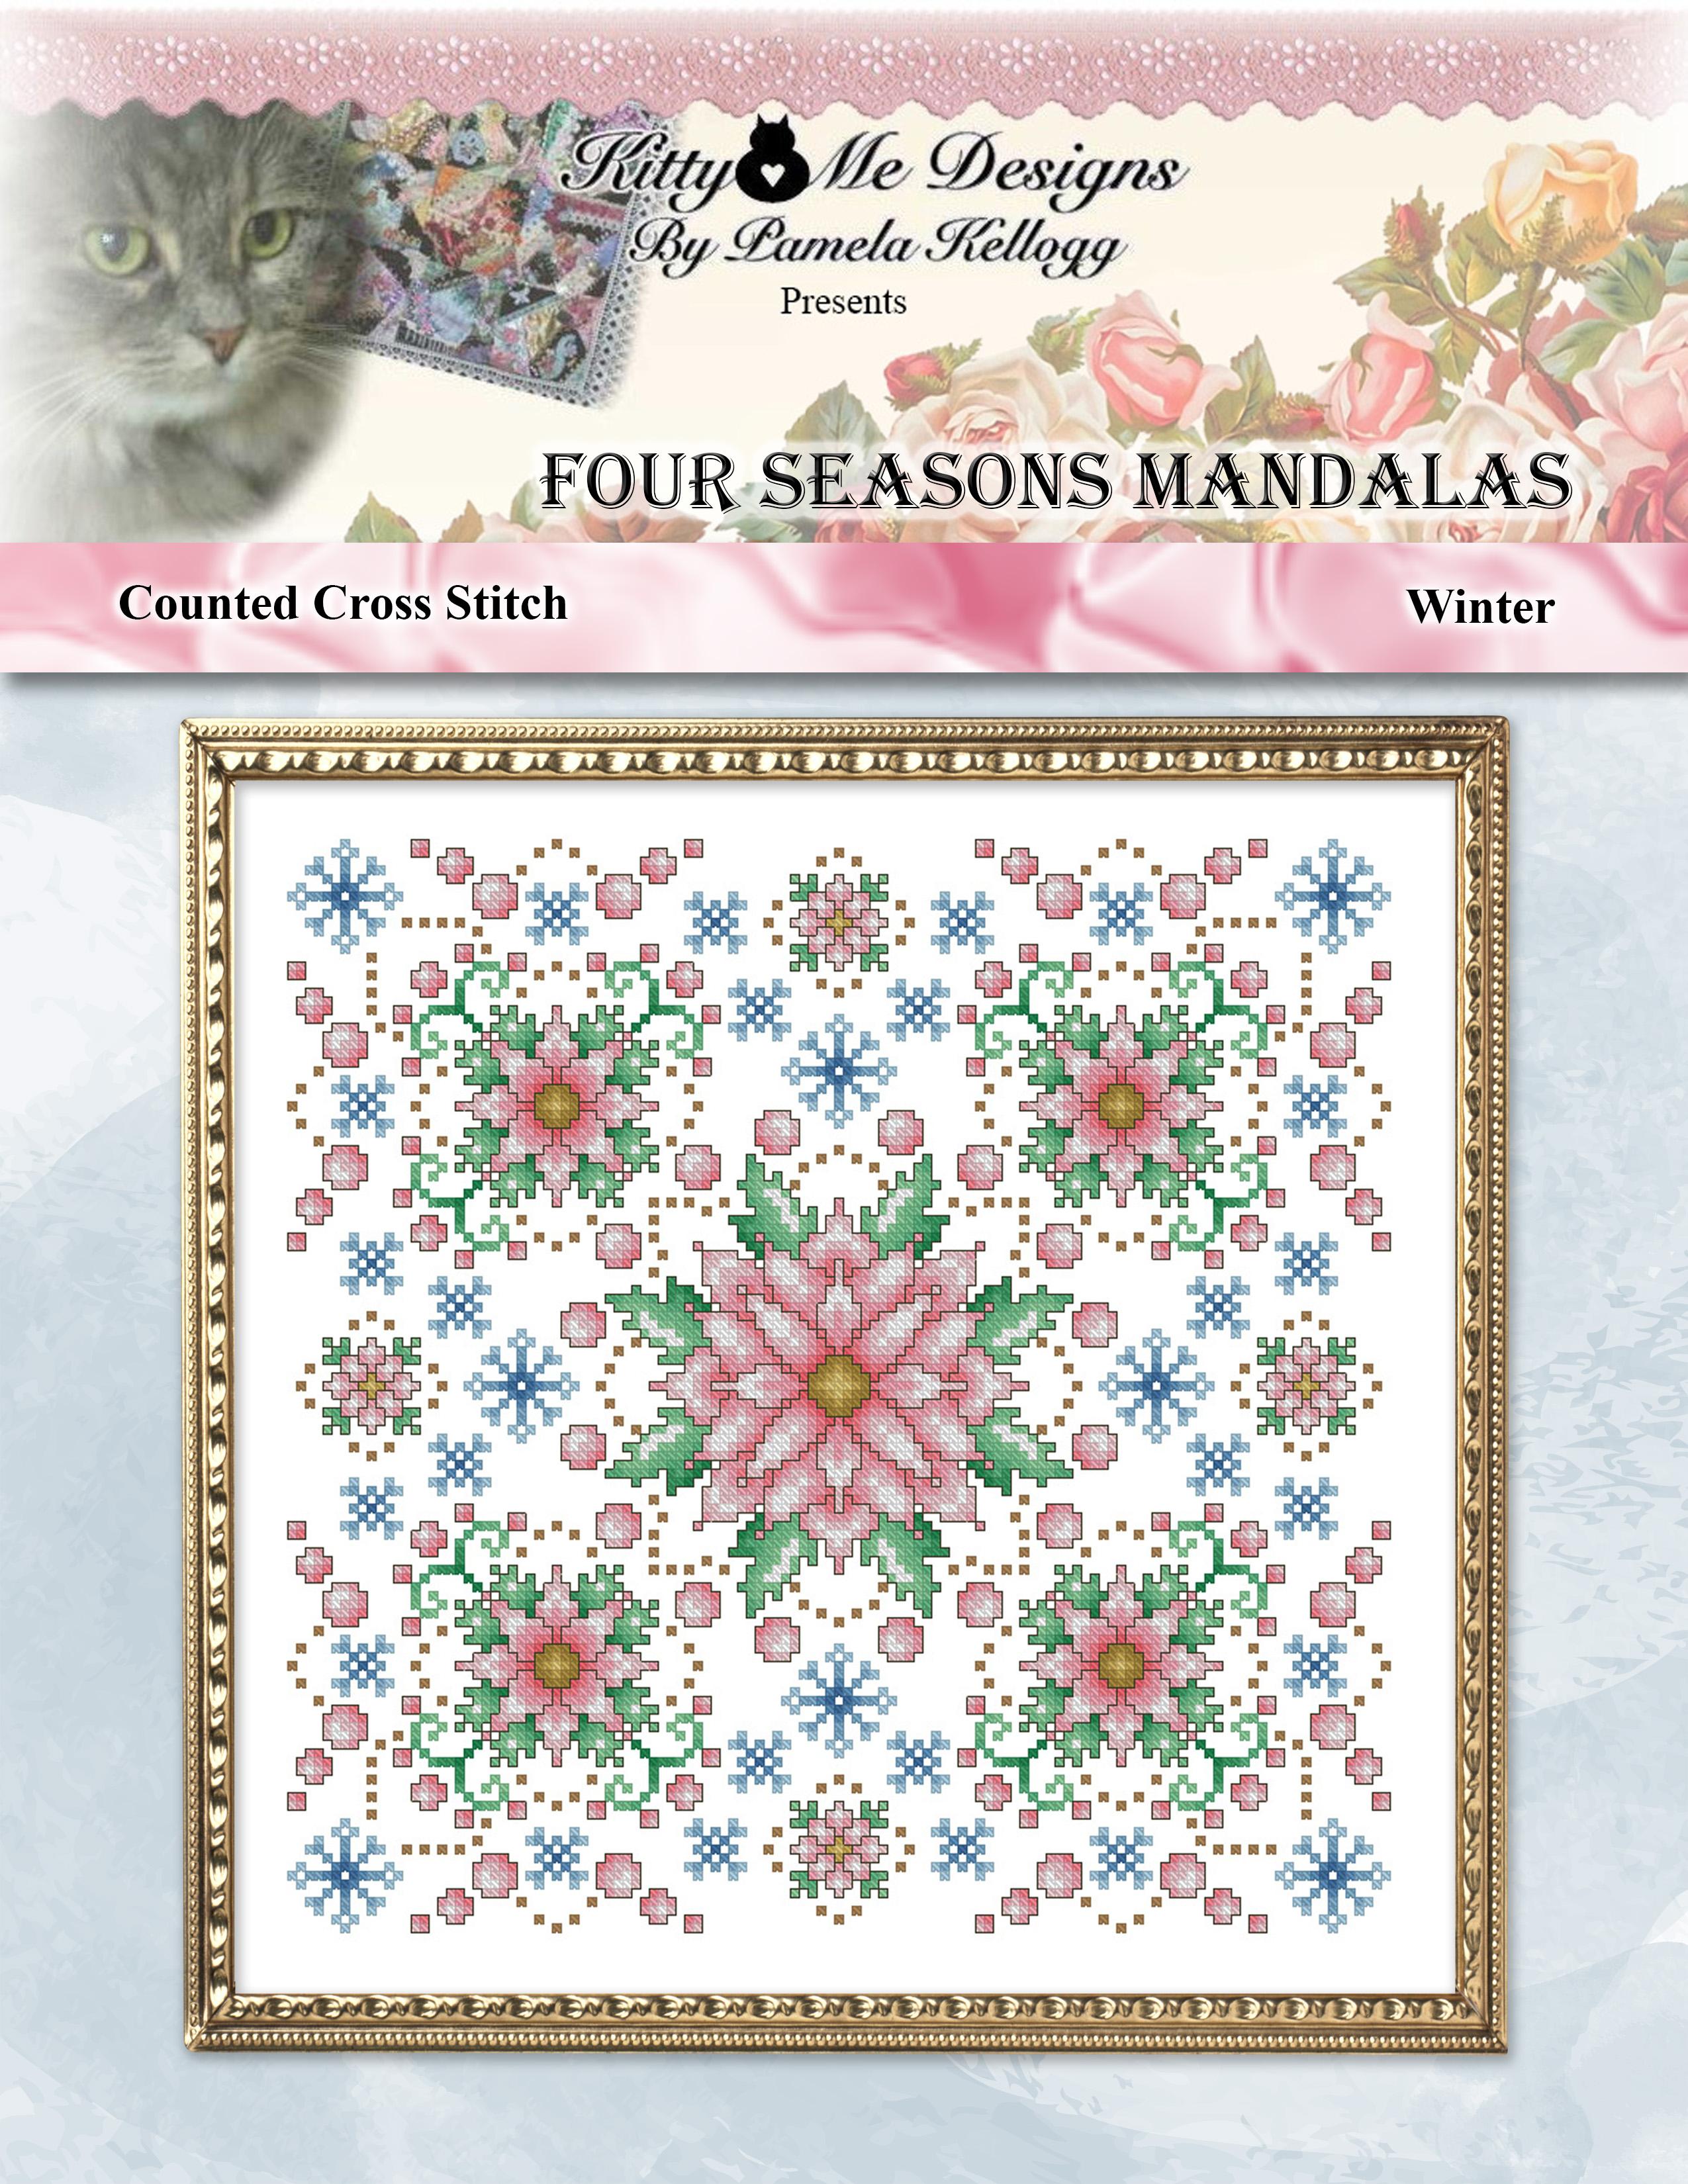 Four Seasons Mandalas: Winter by Kitty and Me Designs